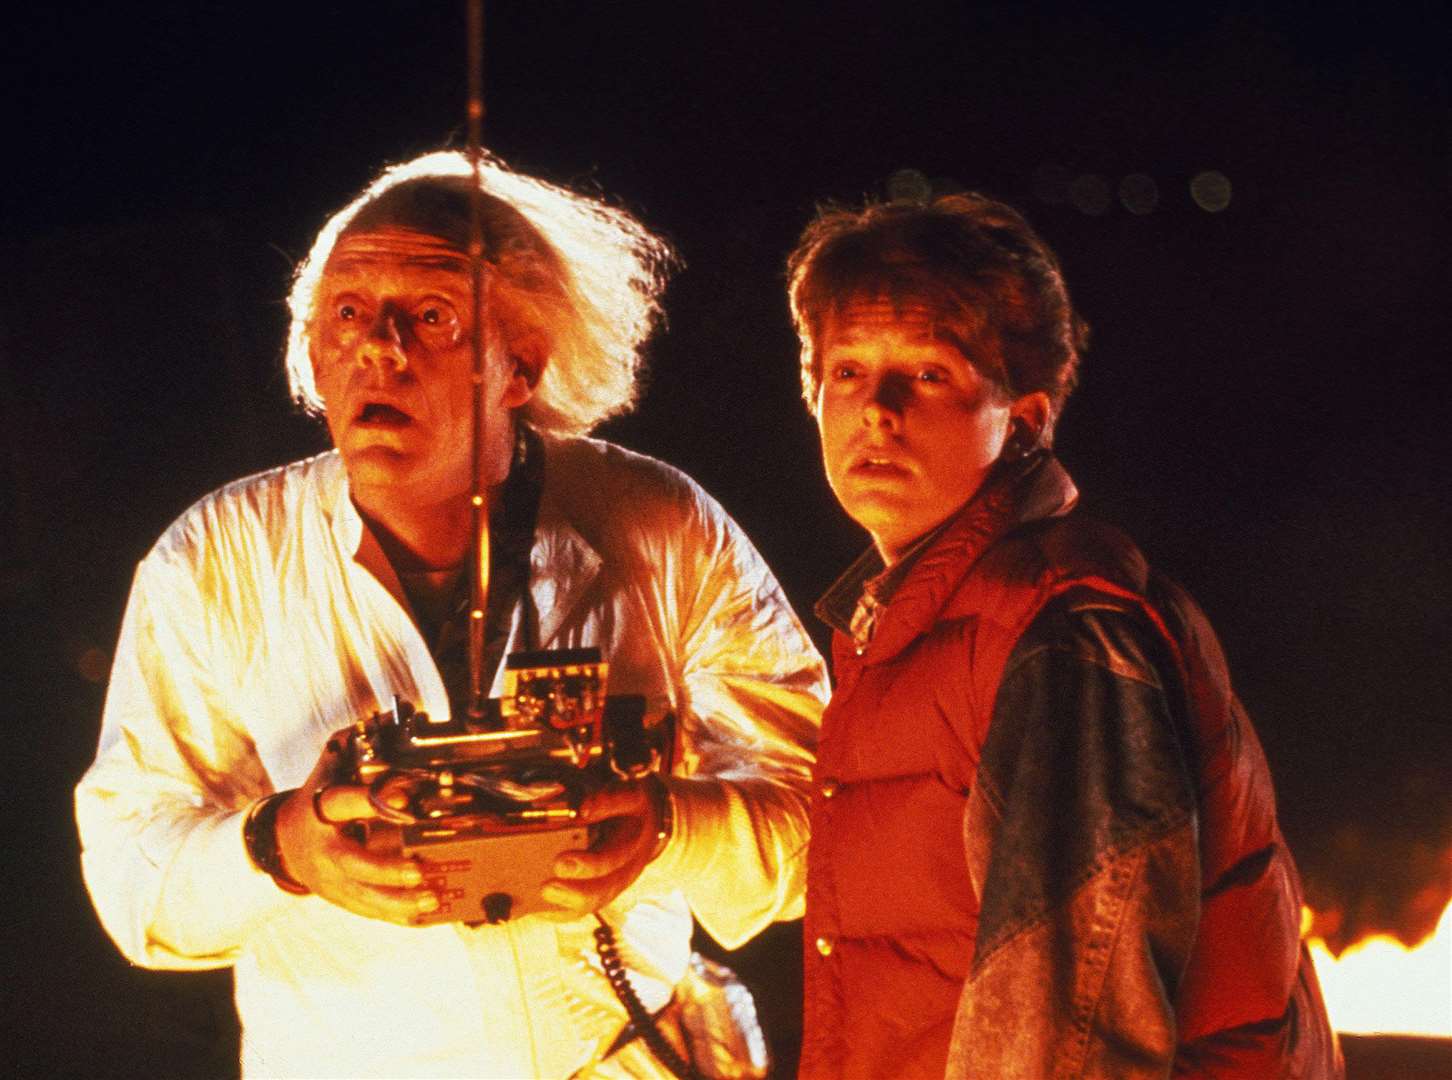 Christopher Lloyd and Michael J Fox in Back to the Future. Picture: Amblin Entertainment / Universal Pictures / Kobal / REX / Shutterstock